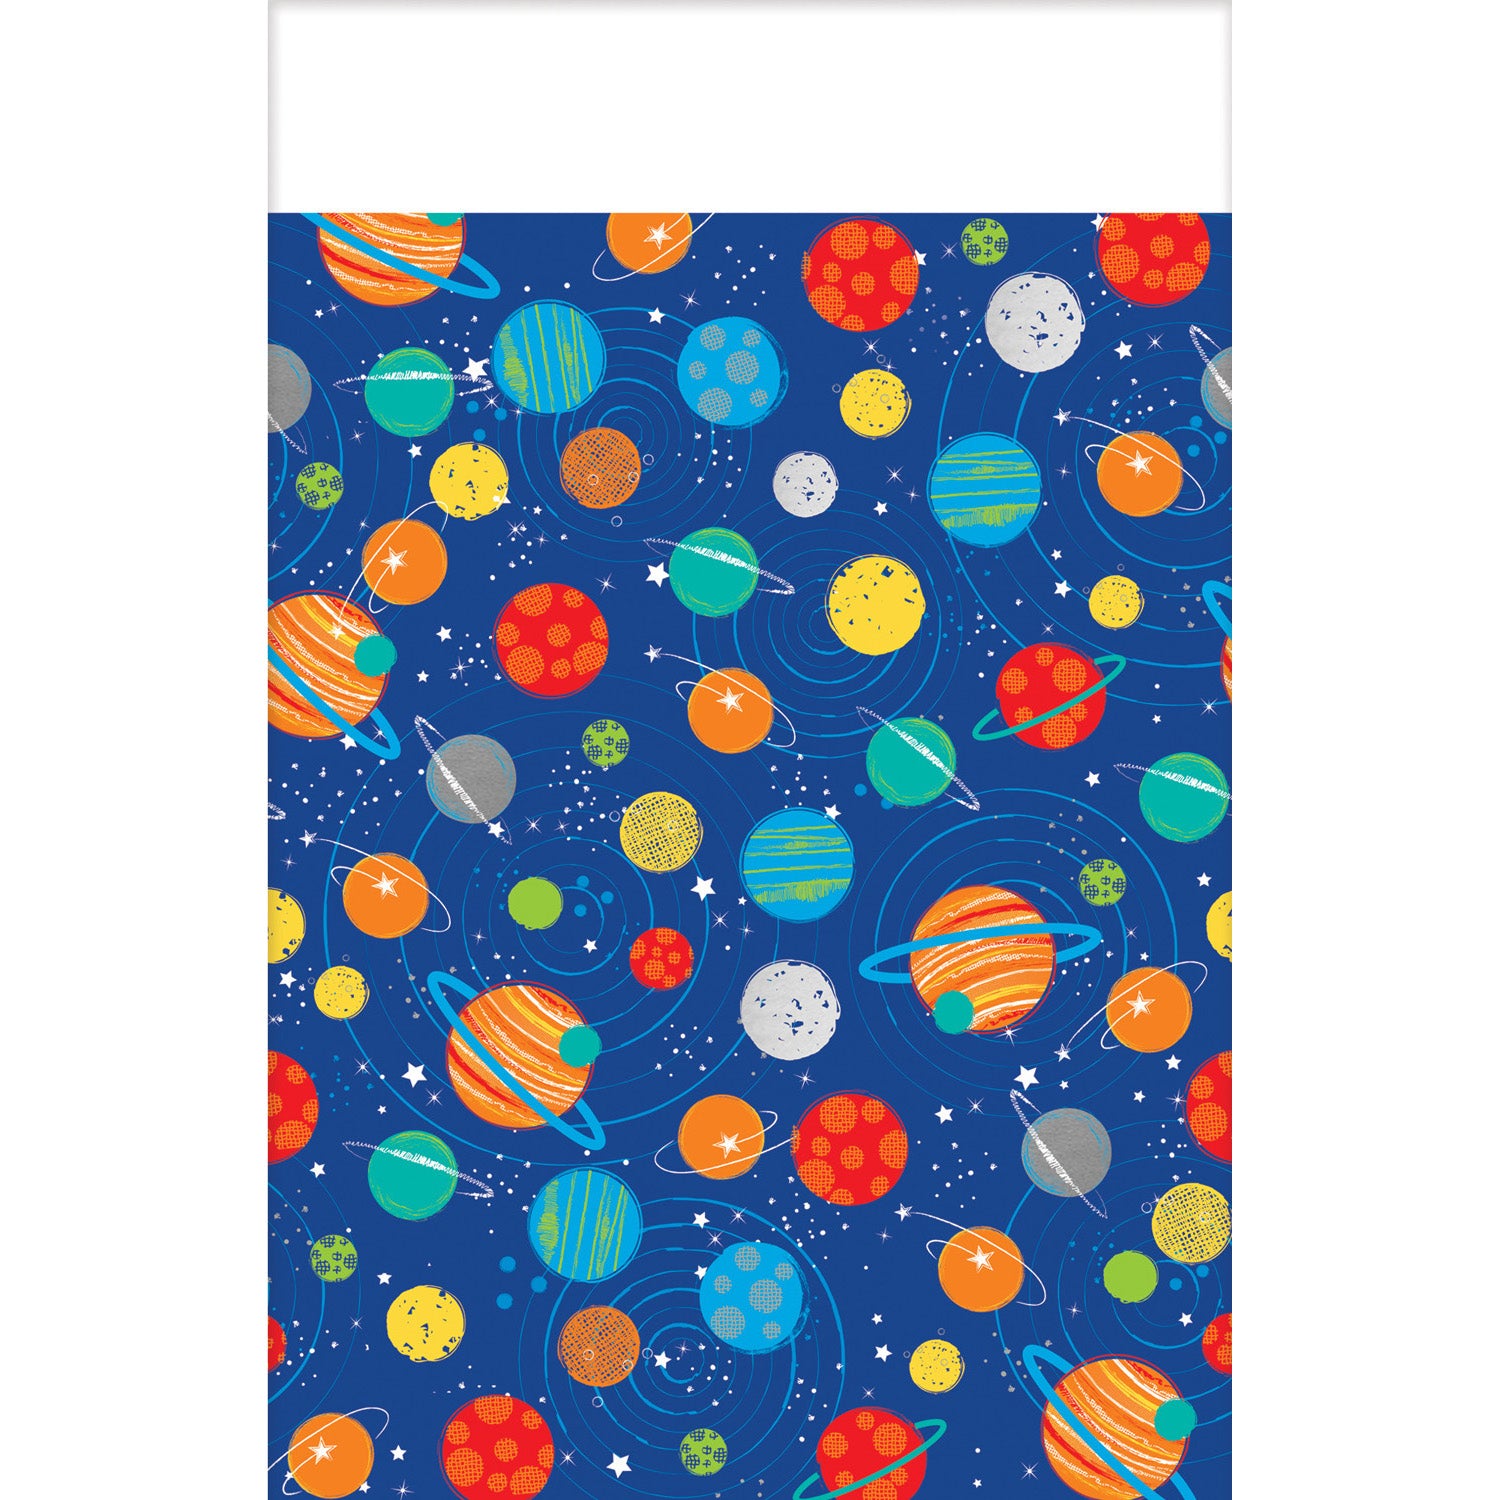 Table cover with planets